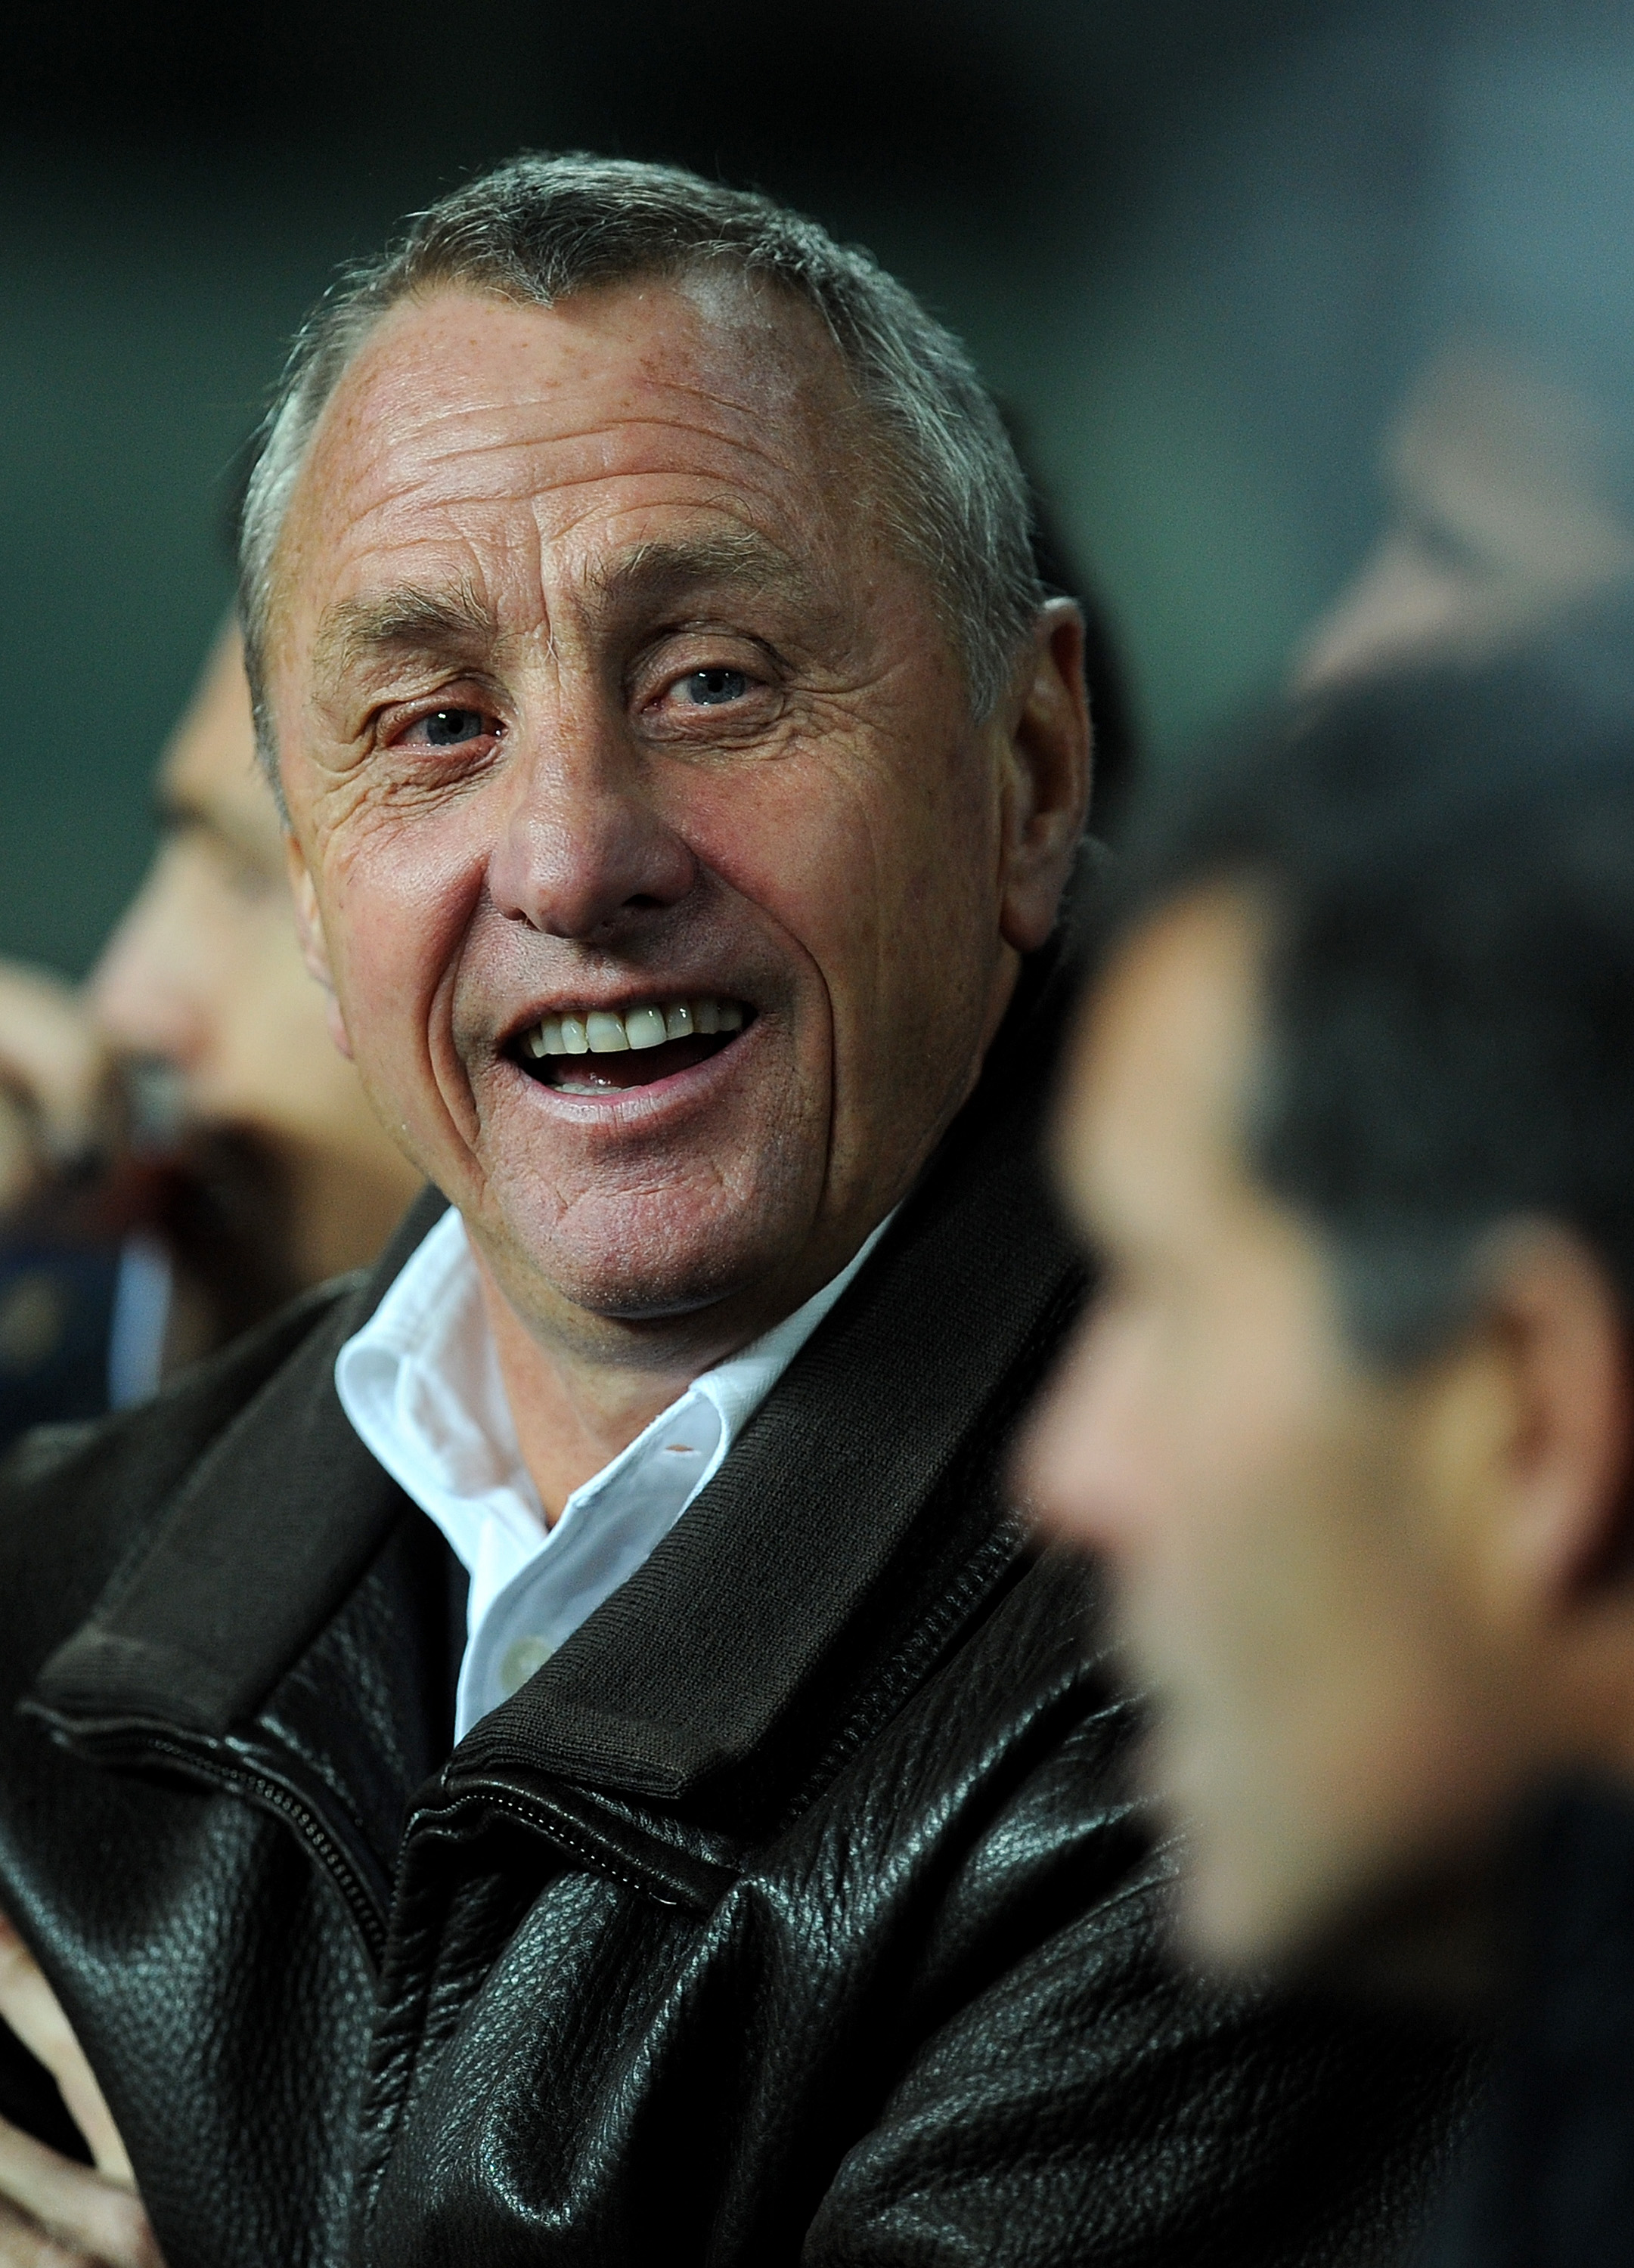 BARCELONA, SPAIN - DECEMBER 22:  Head coach Johan Cruyff of Catalunya smiles during the international friendly match between Catalunya and Argentina at the Camp Nou stadium on December 22, 2009 in Barcelona, Spain. Catalunya won the match 4-2.  (Photo by